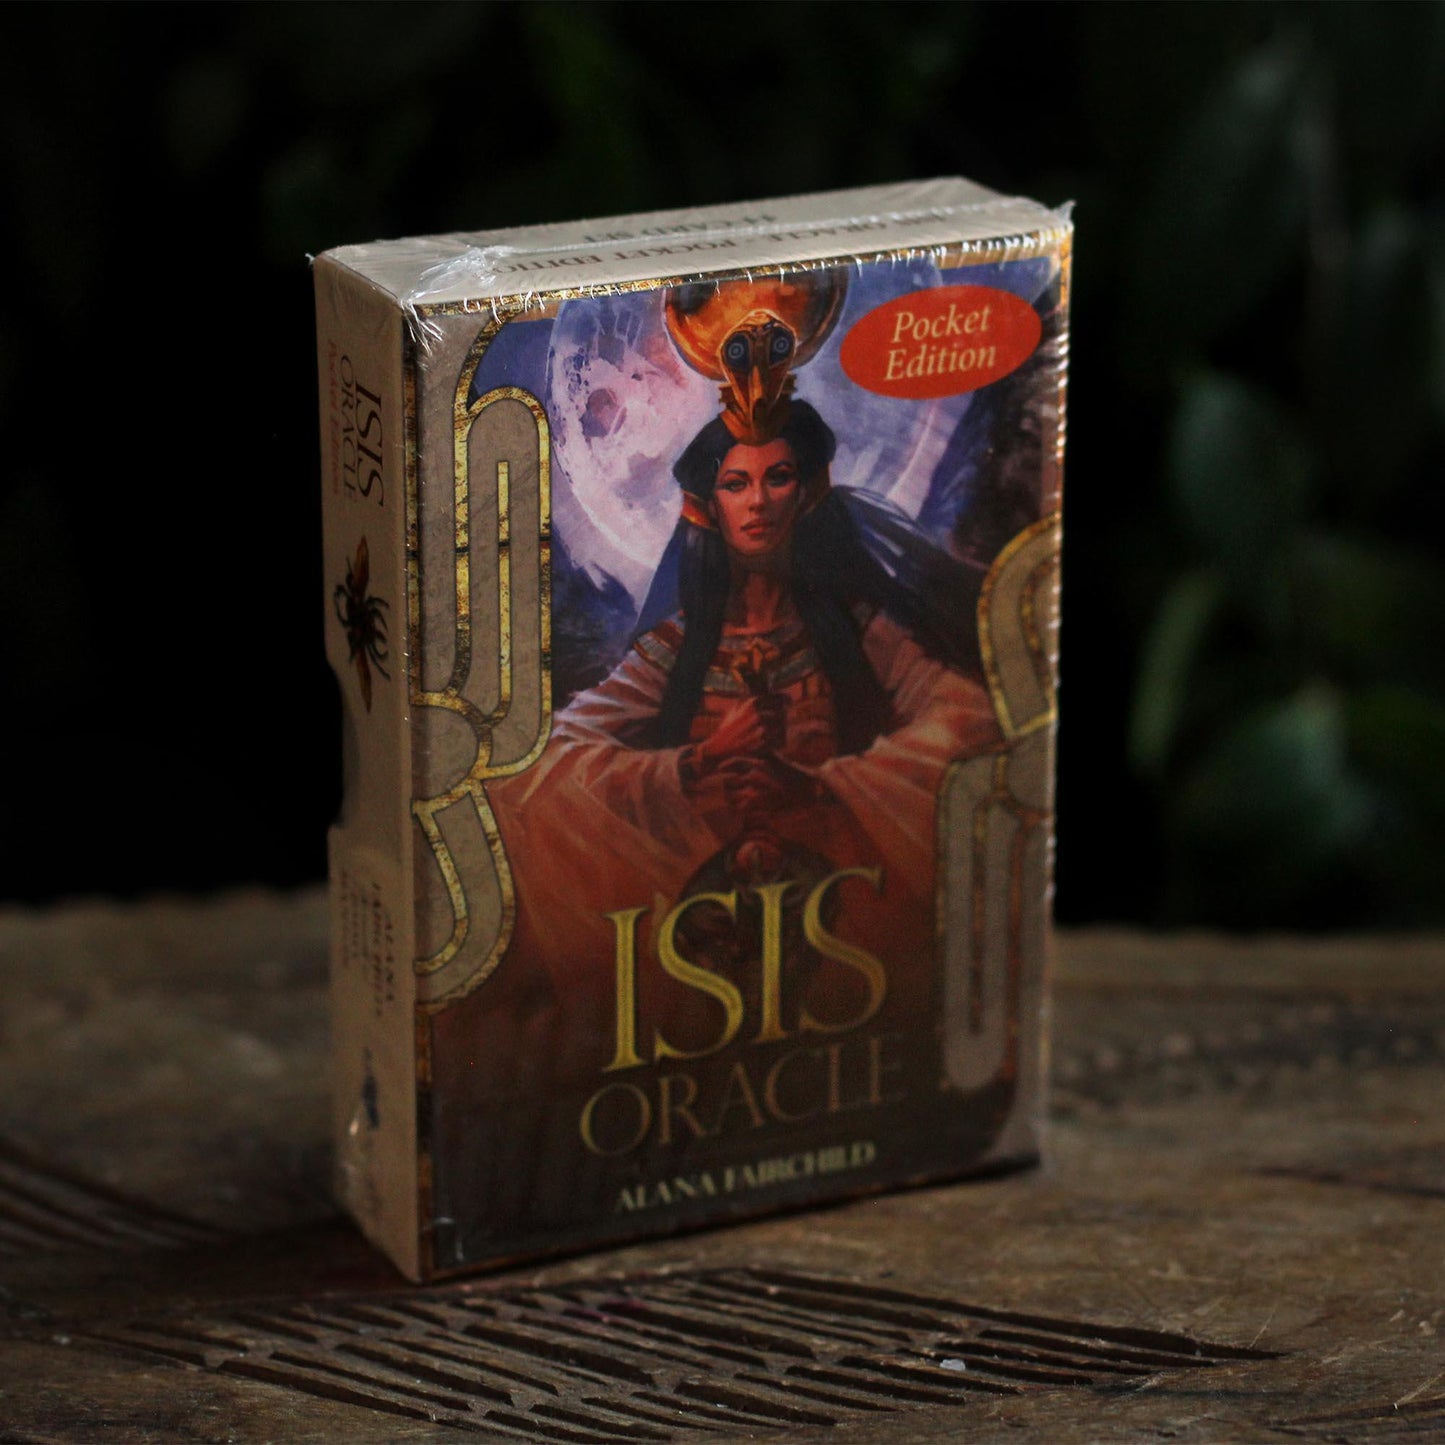 ISIS ORACLE (POCKET EDITION)